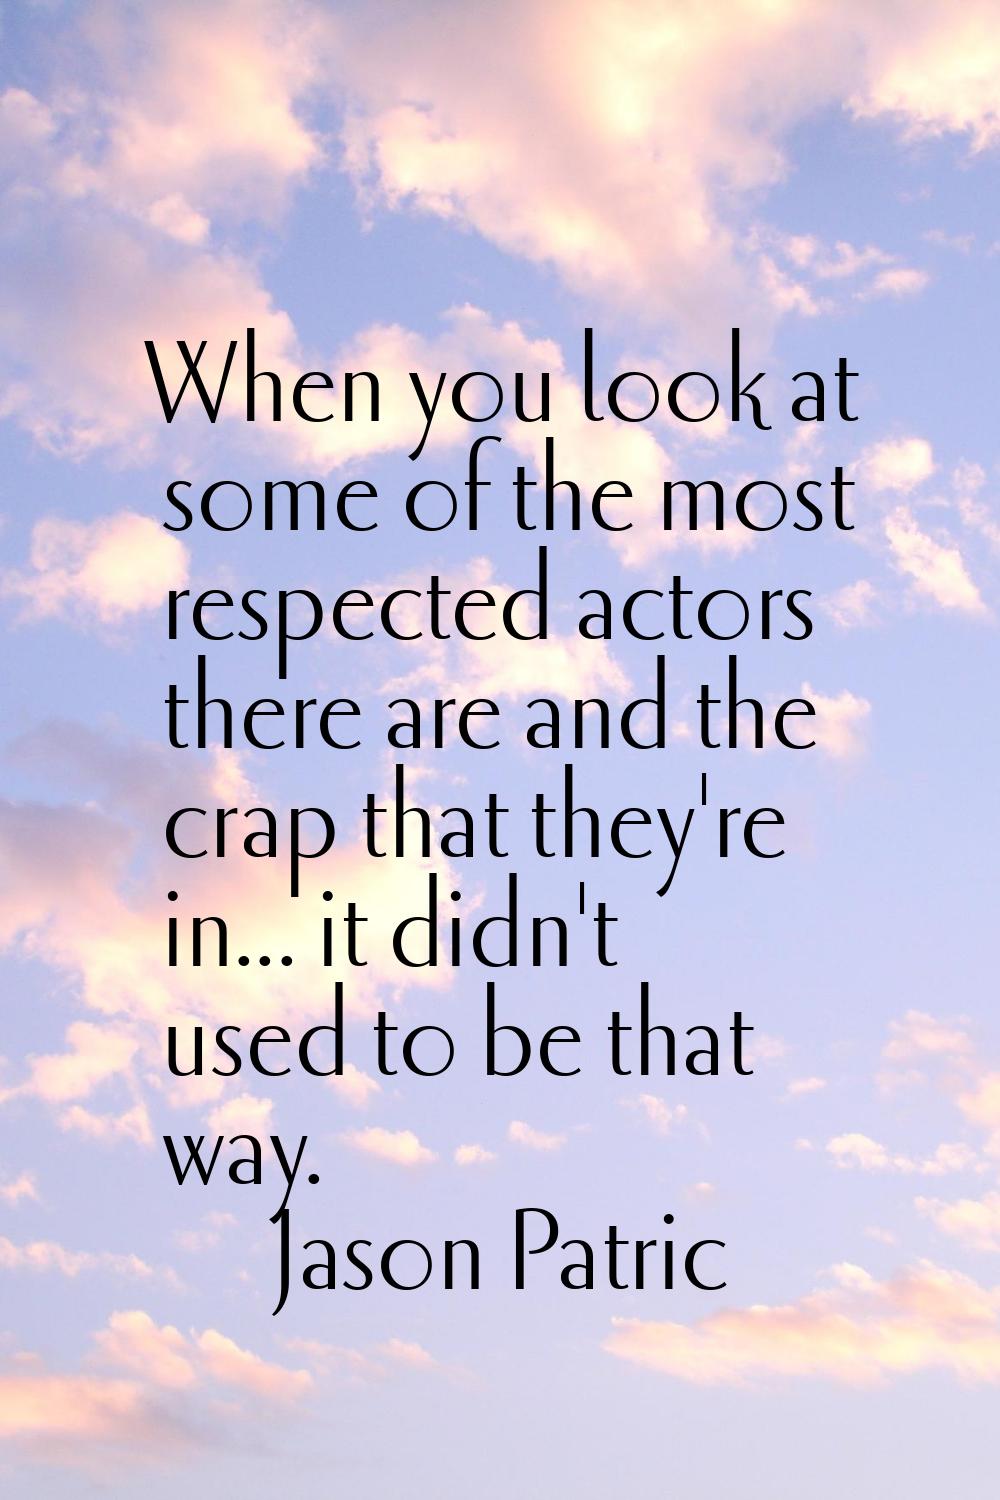 When you look at some of the most respected actors there are and the crap that they're in... it did